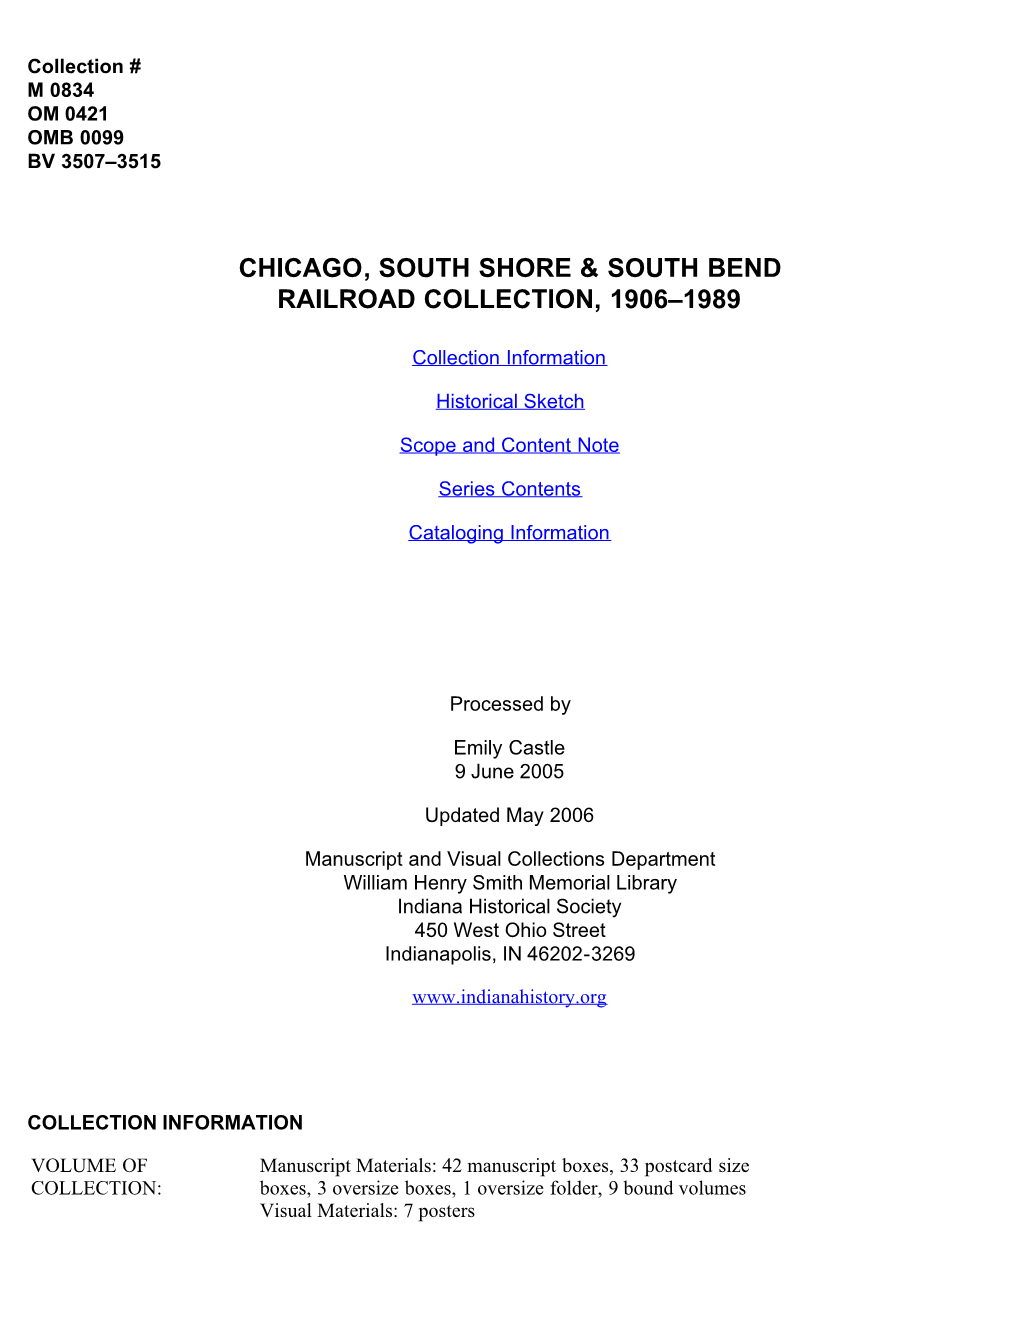 Chicago, South Shore & South Bend Railroad Collection